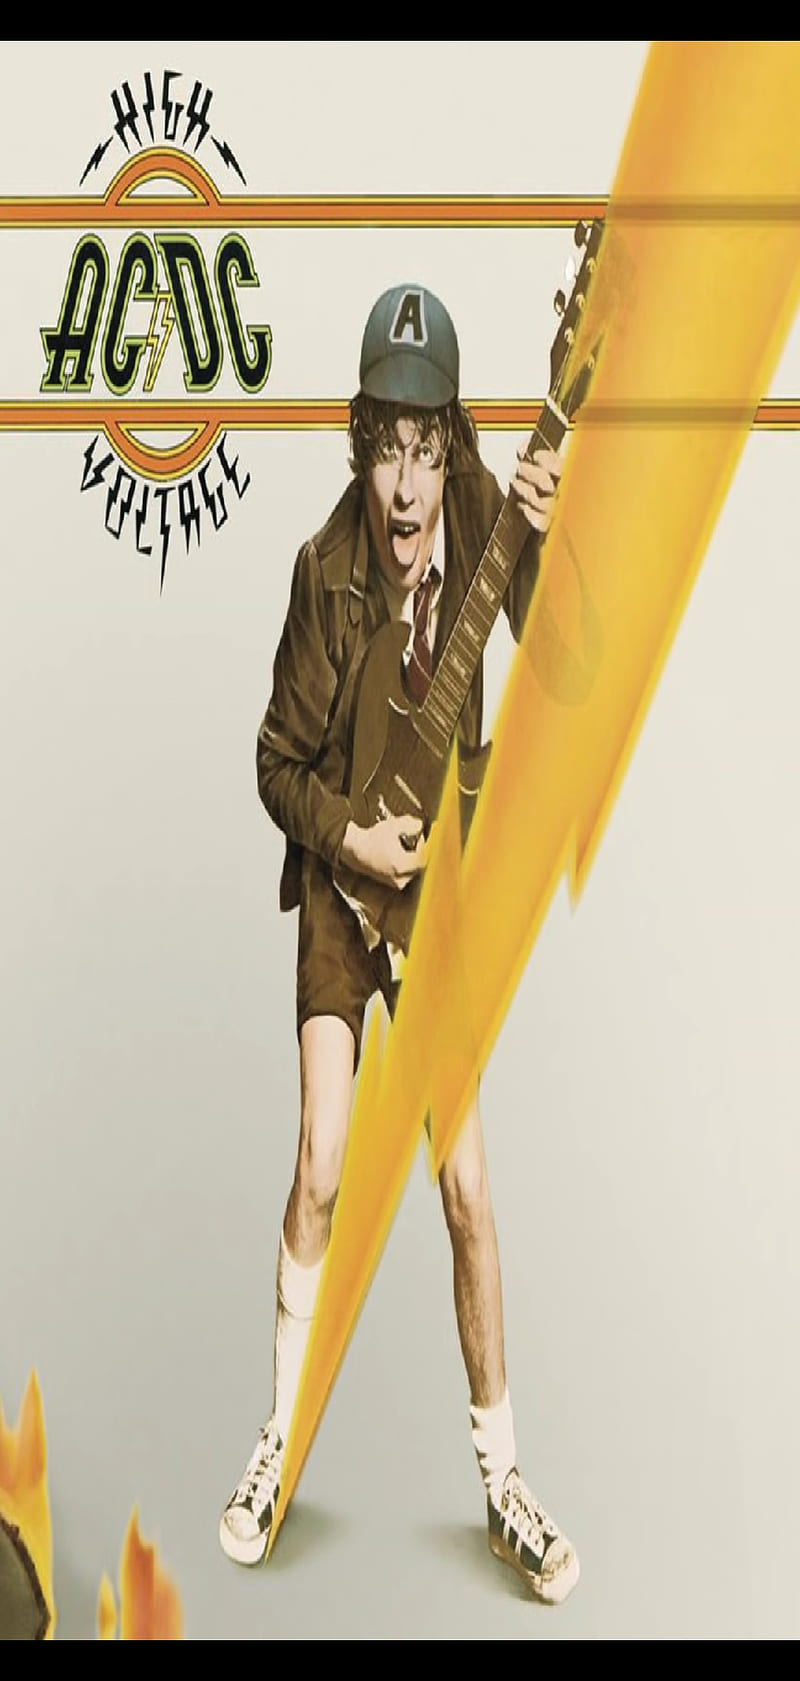 1290x2796px, 2K free download | ACDC HIGH VOLTAGE, album, band, cover